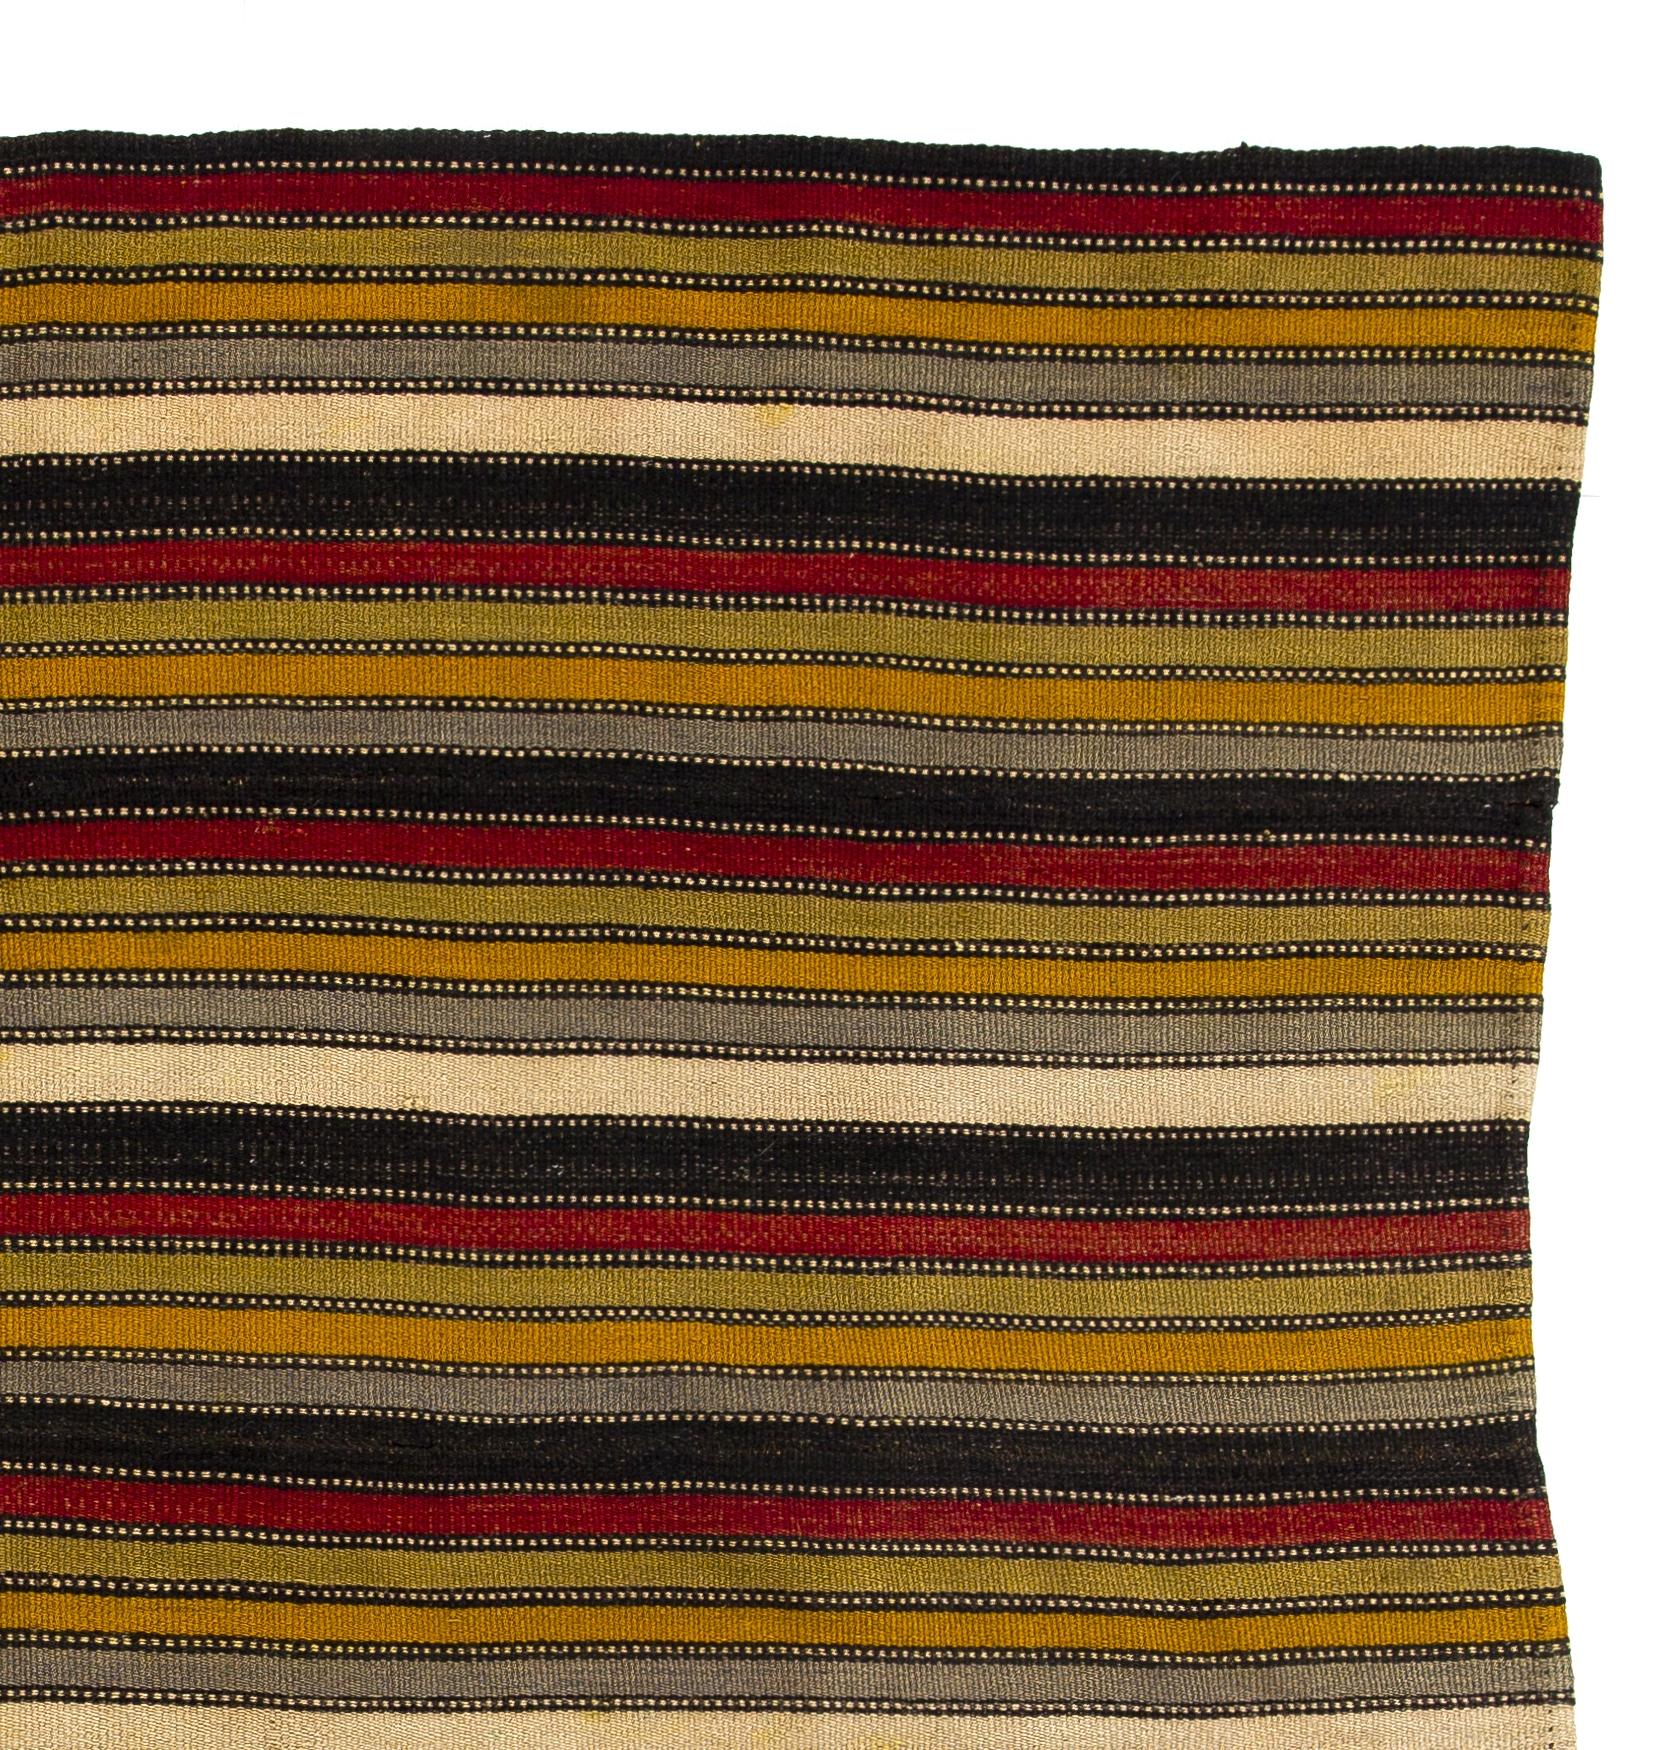 A vintage hand-woven rug from Eastern Turkey. It is made of naturally dyed wool. This type of Kilim were produced across Anatolia throughout 20th century for daily use rather than re-sale or export purposes and today they are quiet popular in